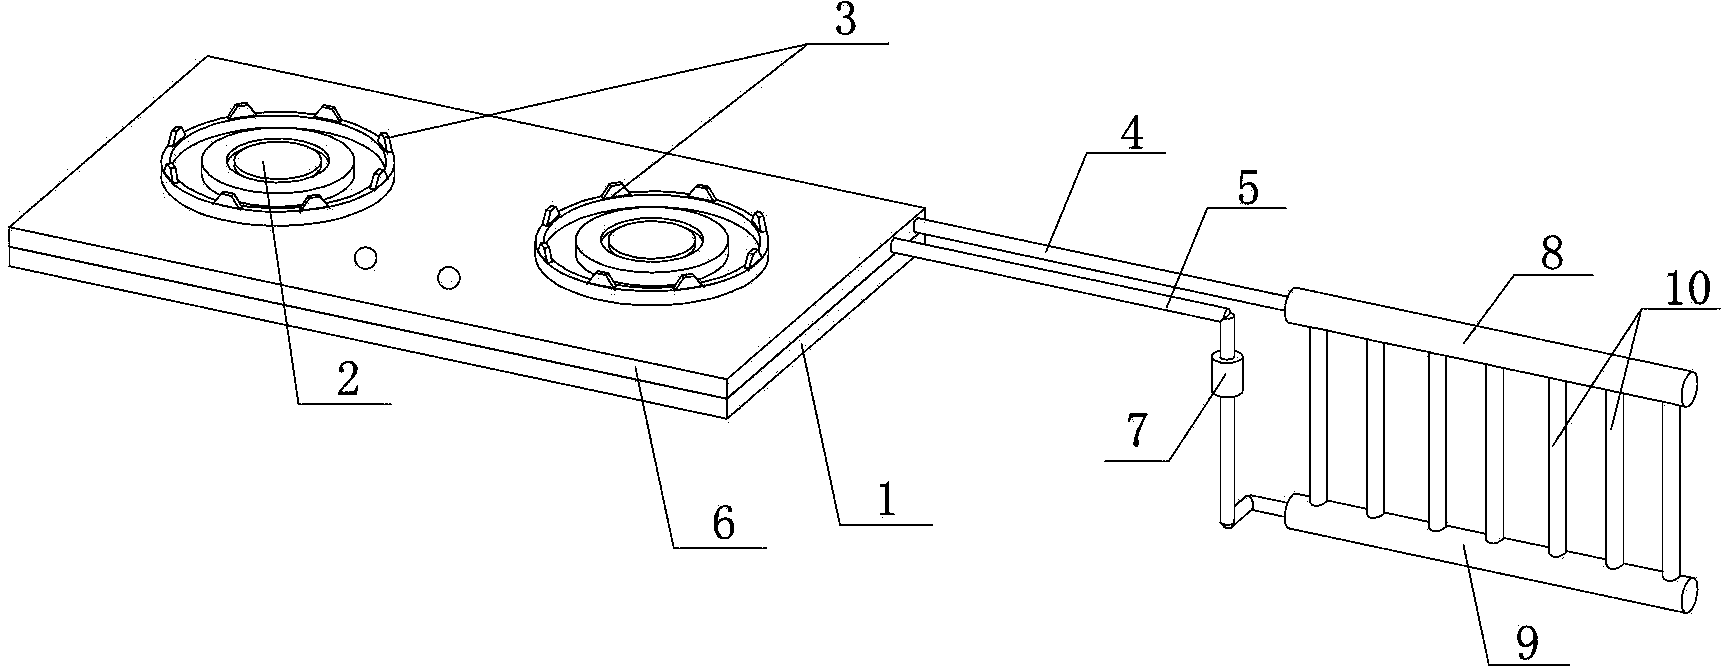 Method for heating by using waste heat of gas stove and gas stove with heating function